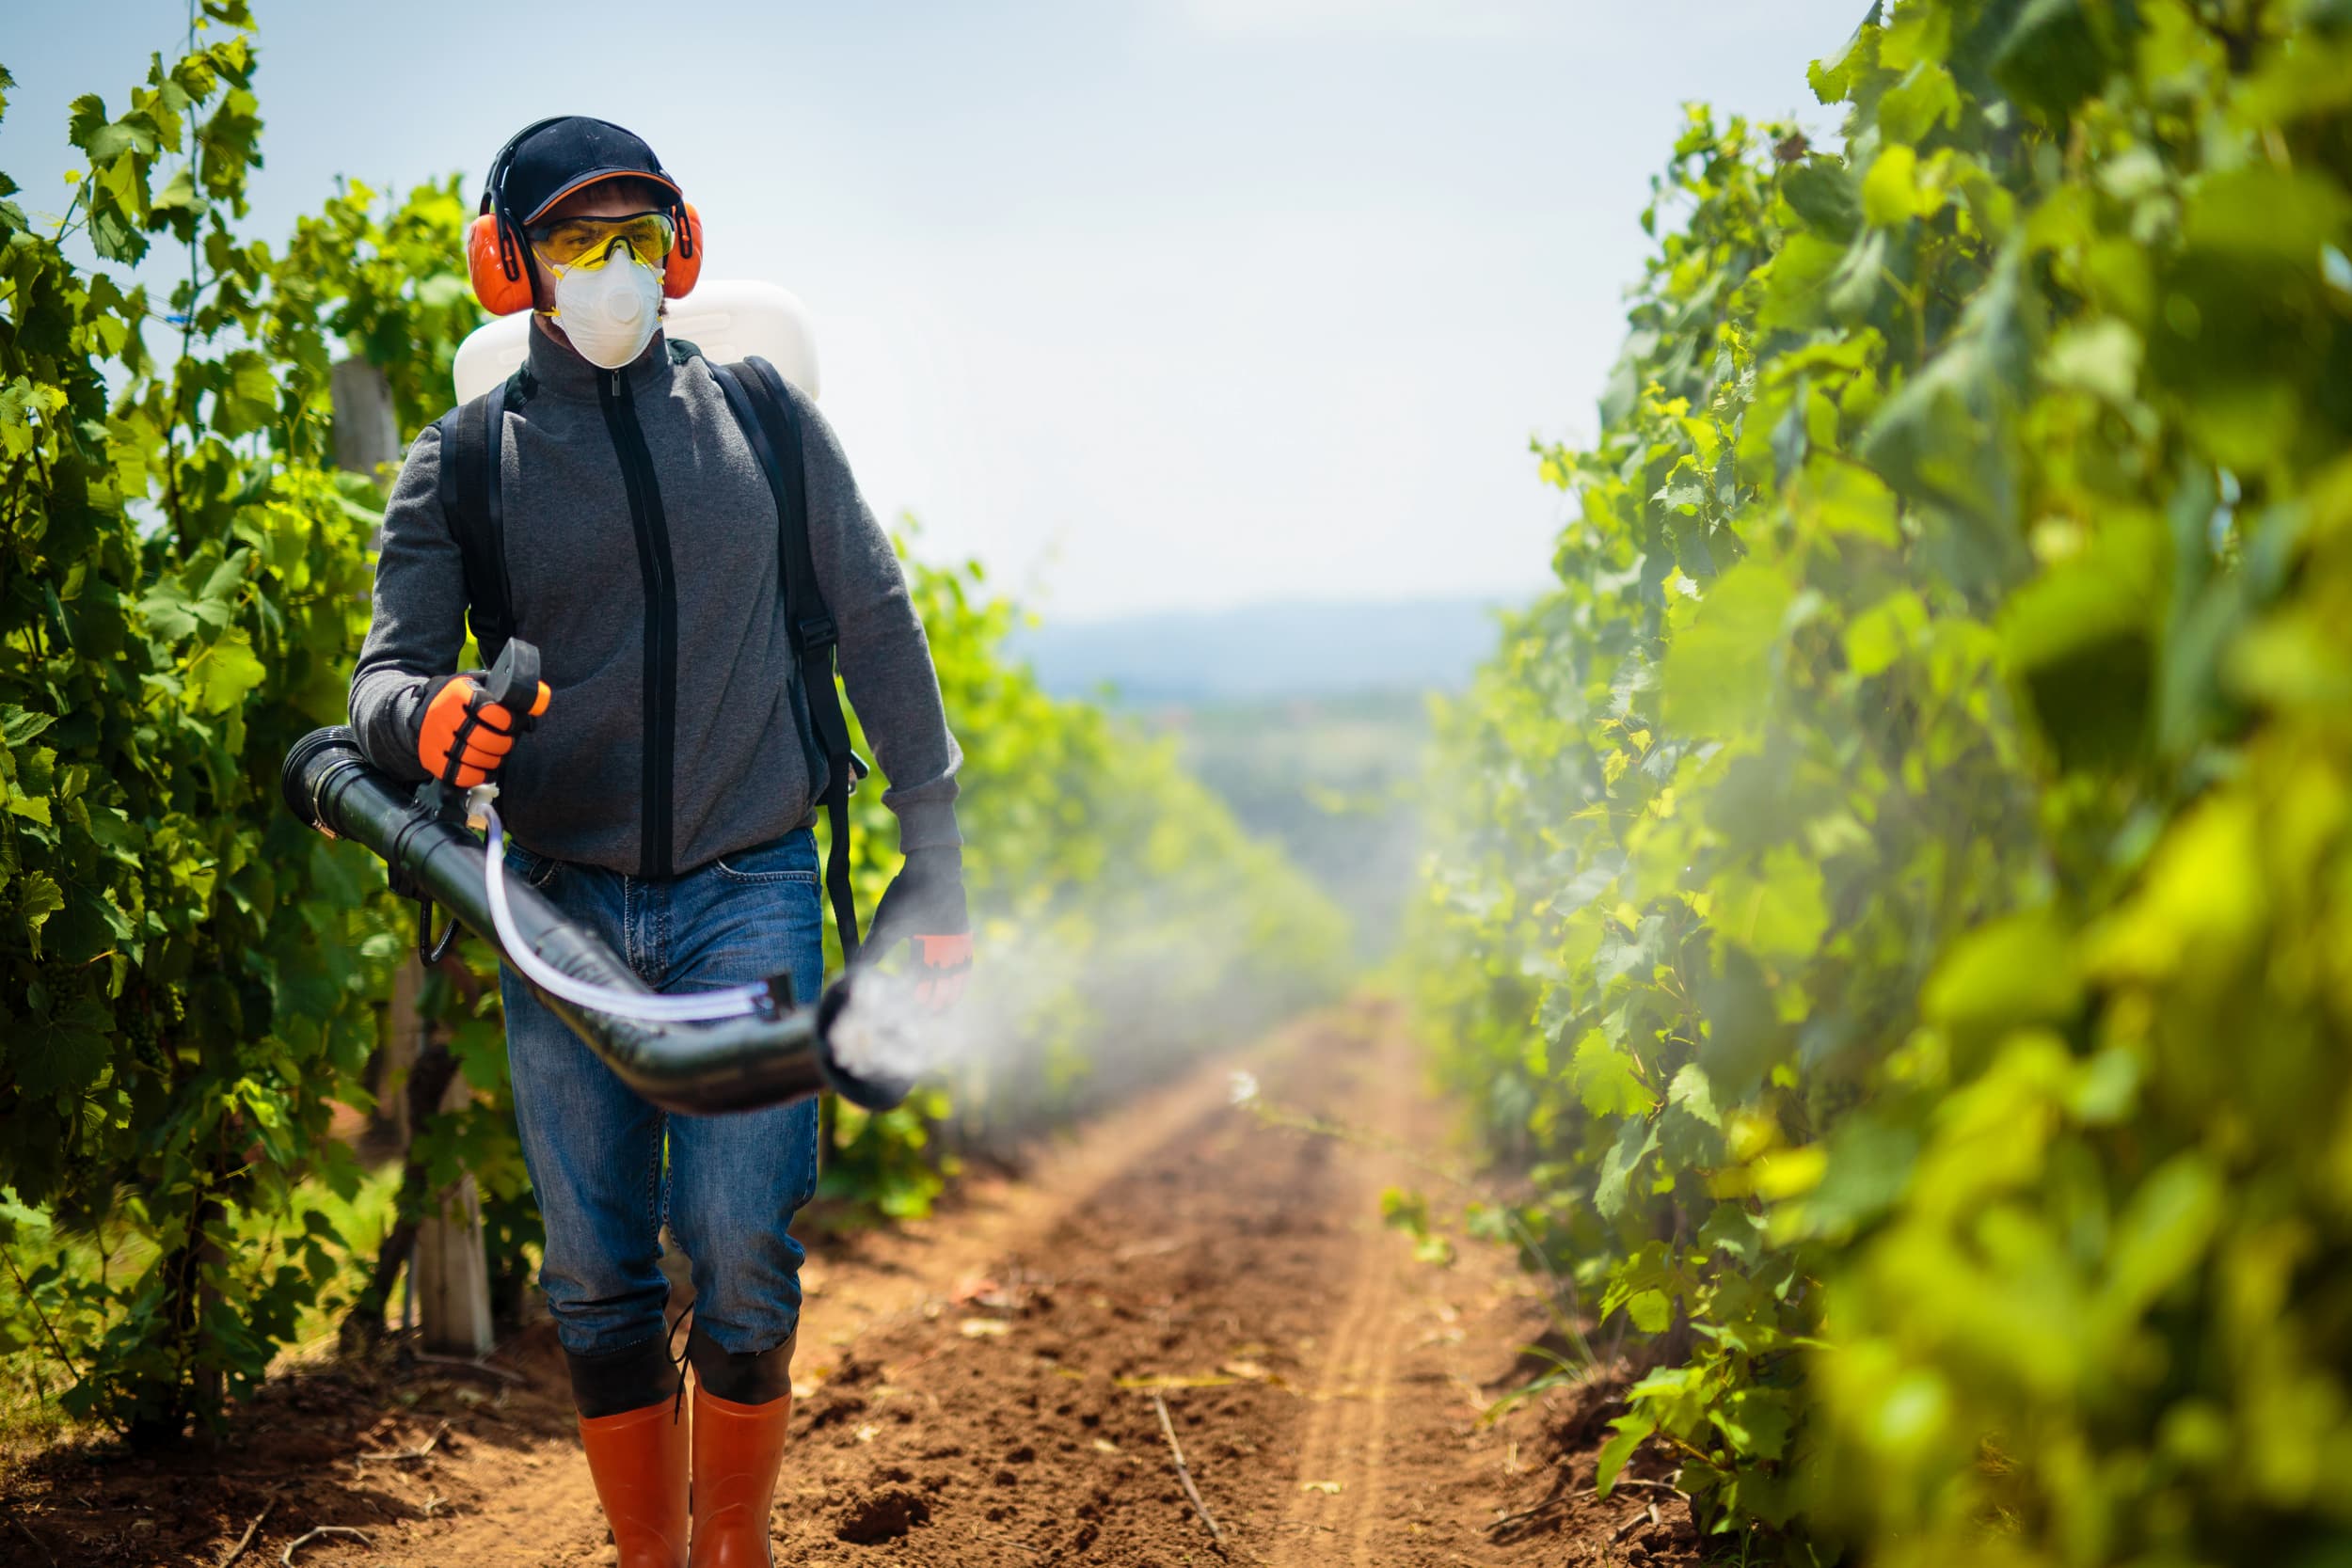 Compliance Training Online Pesticide Worker Safety course